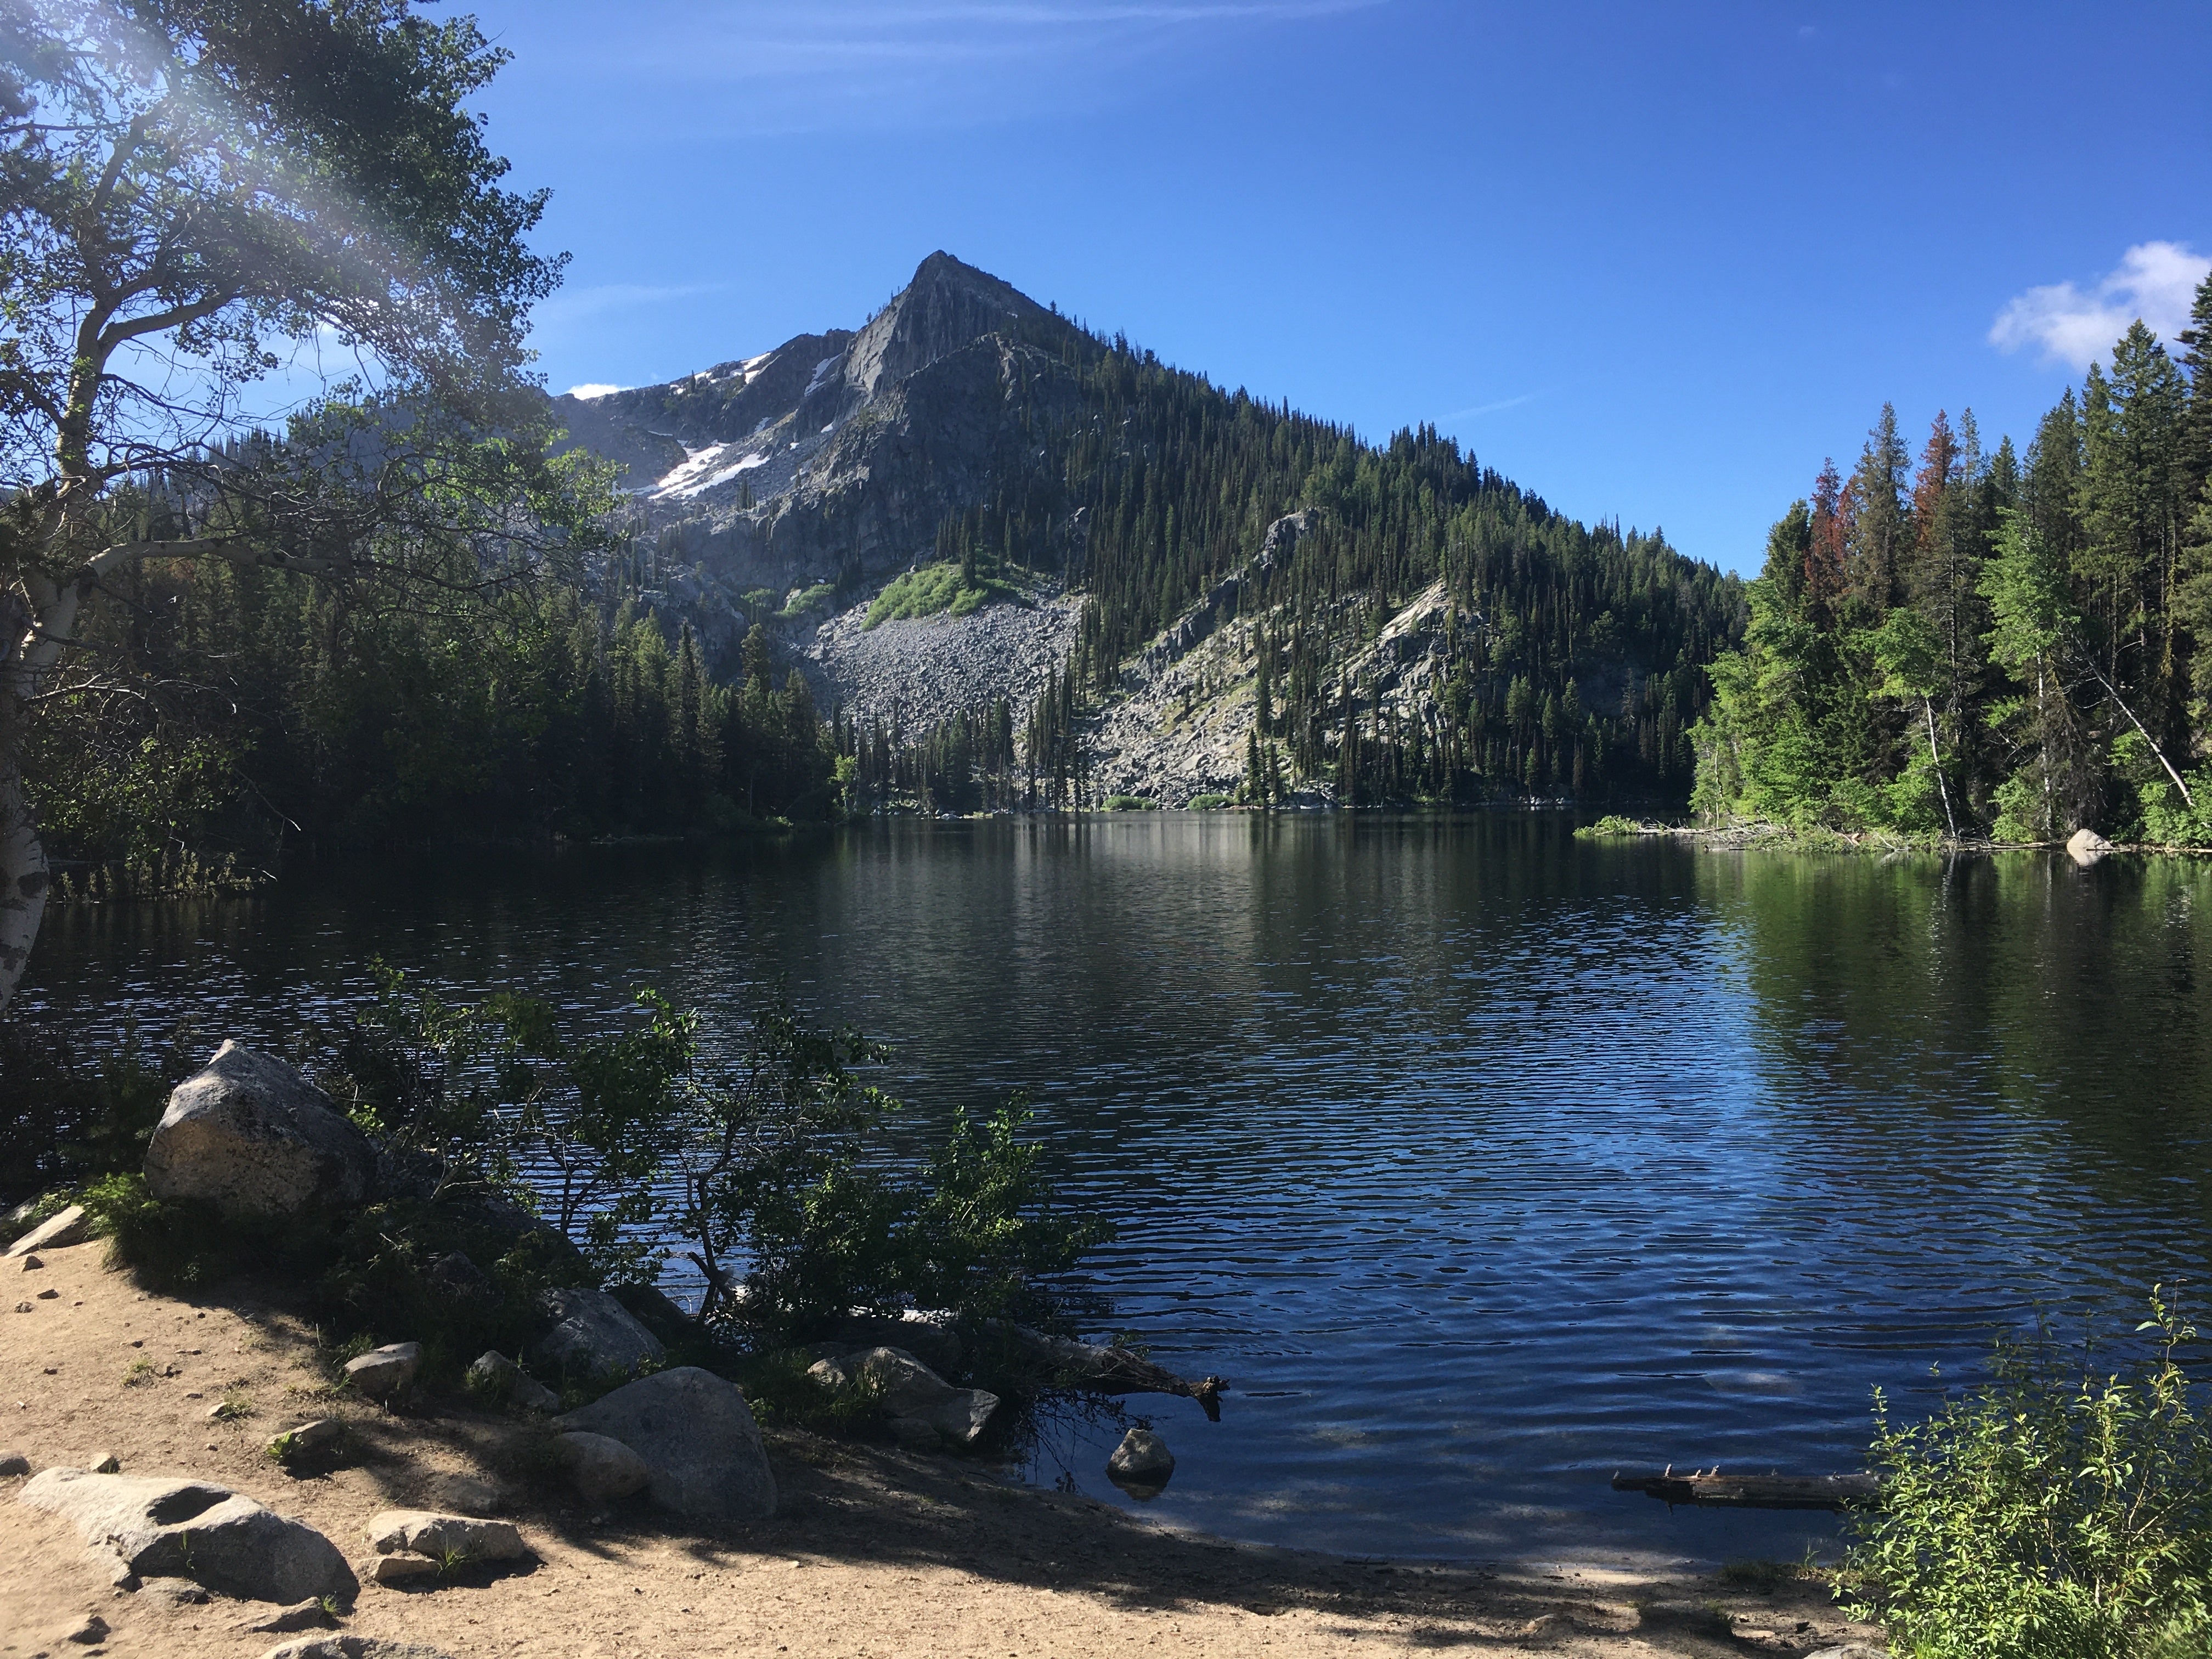 Camper submitted image from Lake Louie Dispersed Backcountry Camping - 3